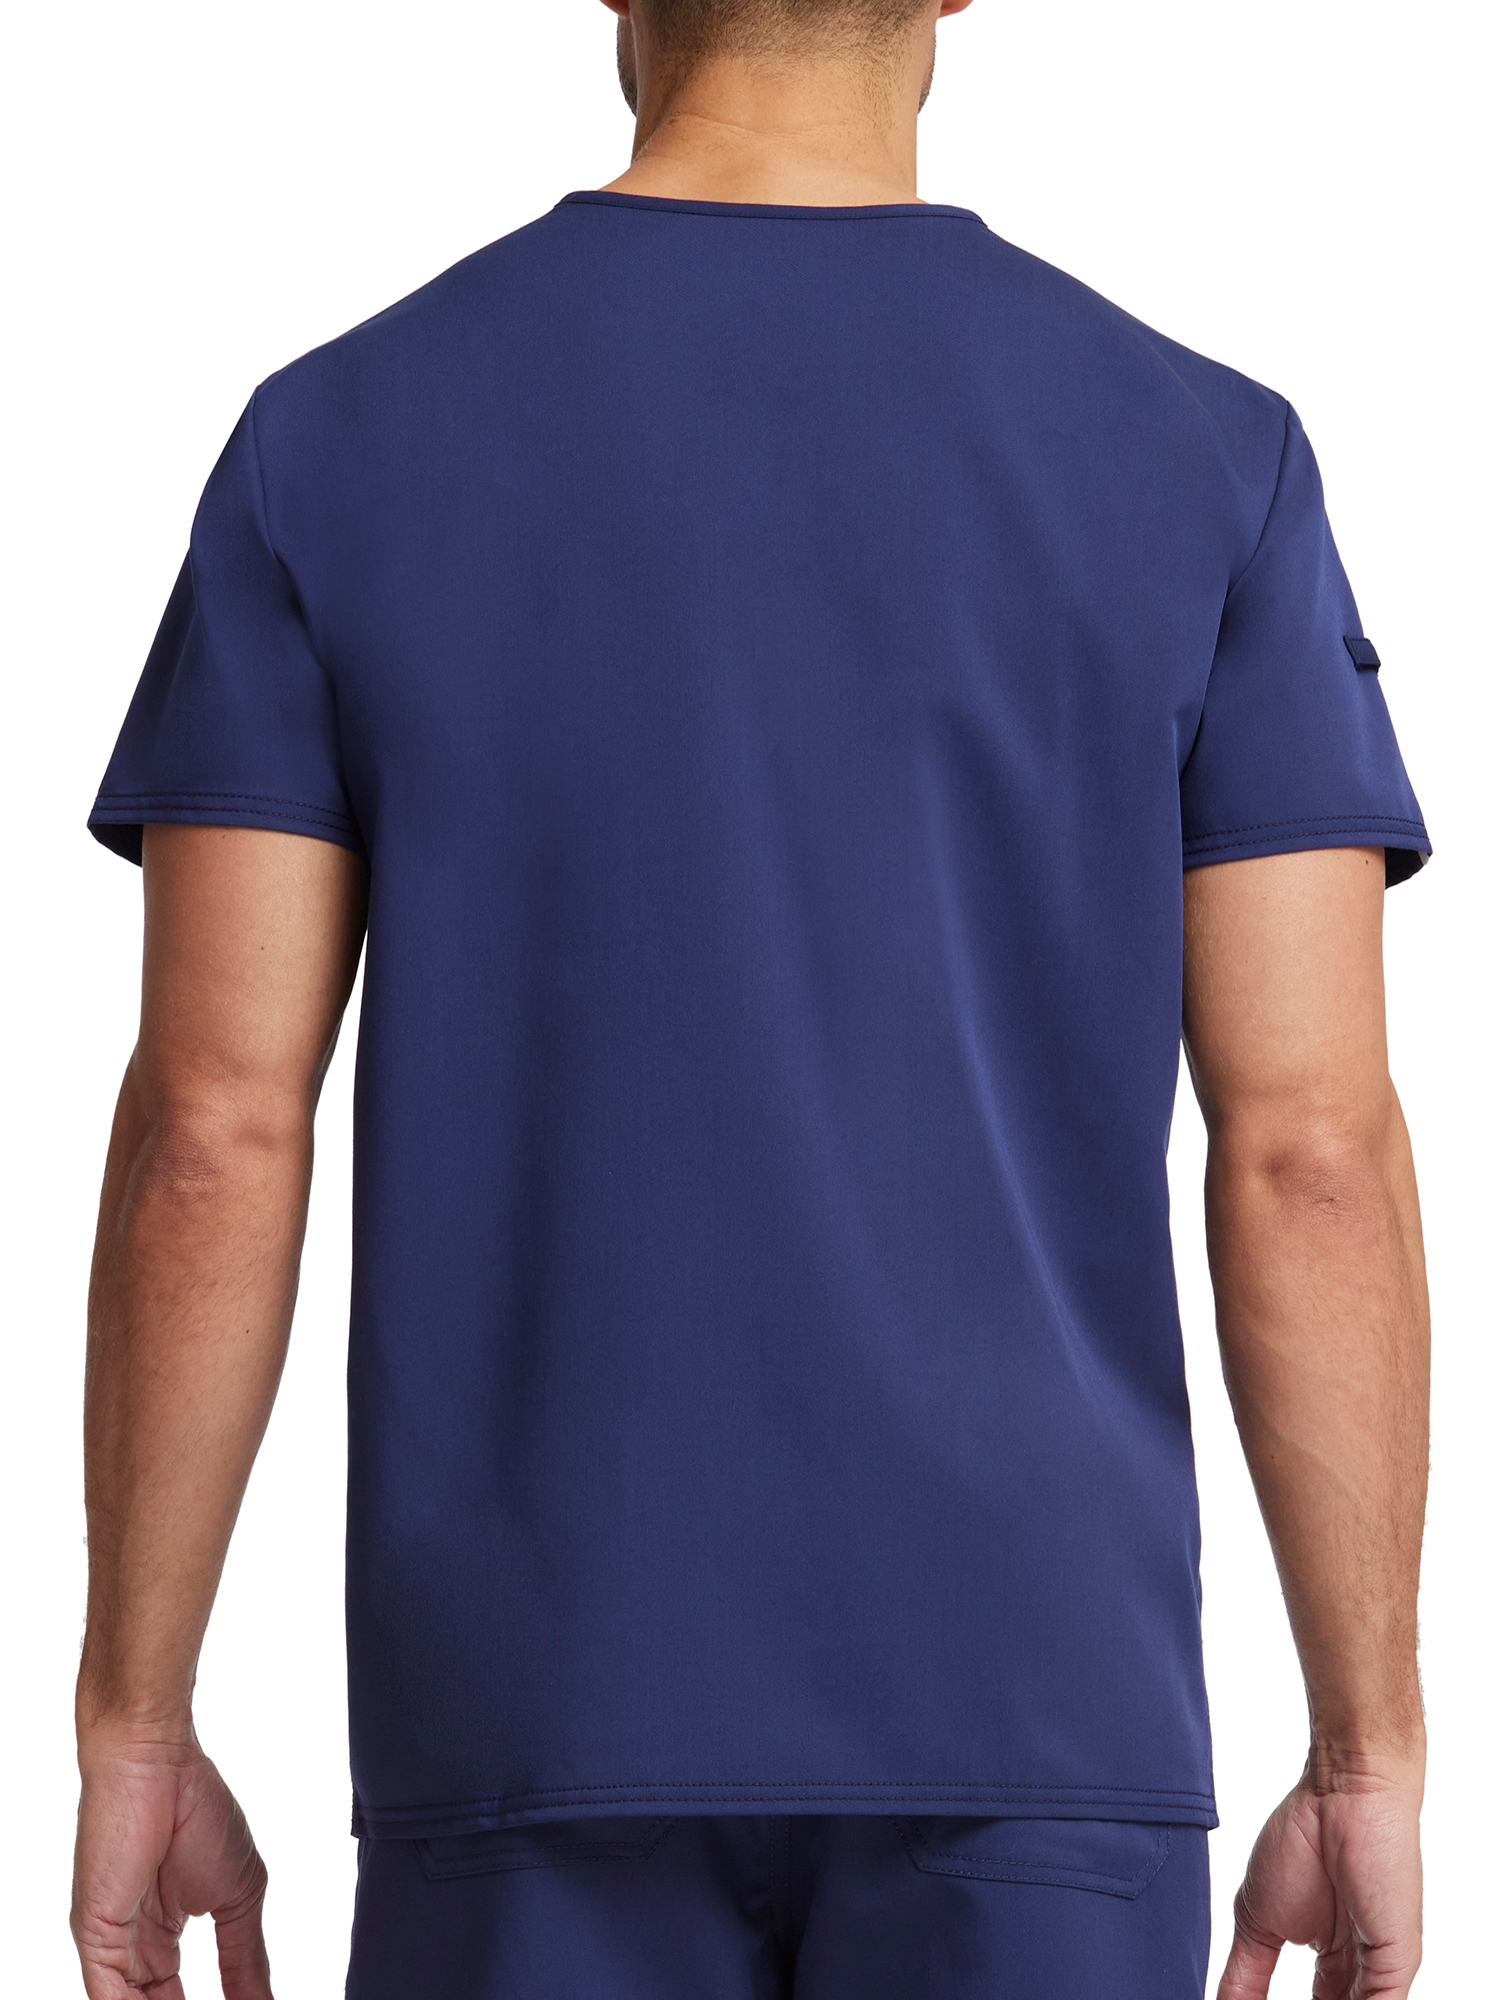 Scrubstar Men's Ultimate Stretch Antimicrobial Fabric Technology V-Neck ...